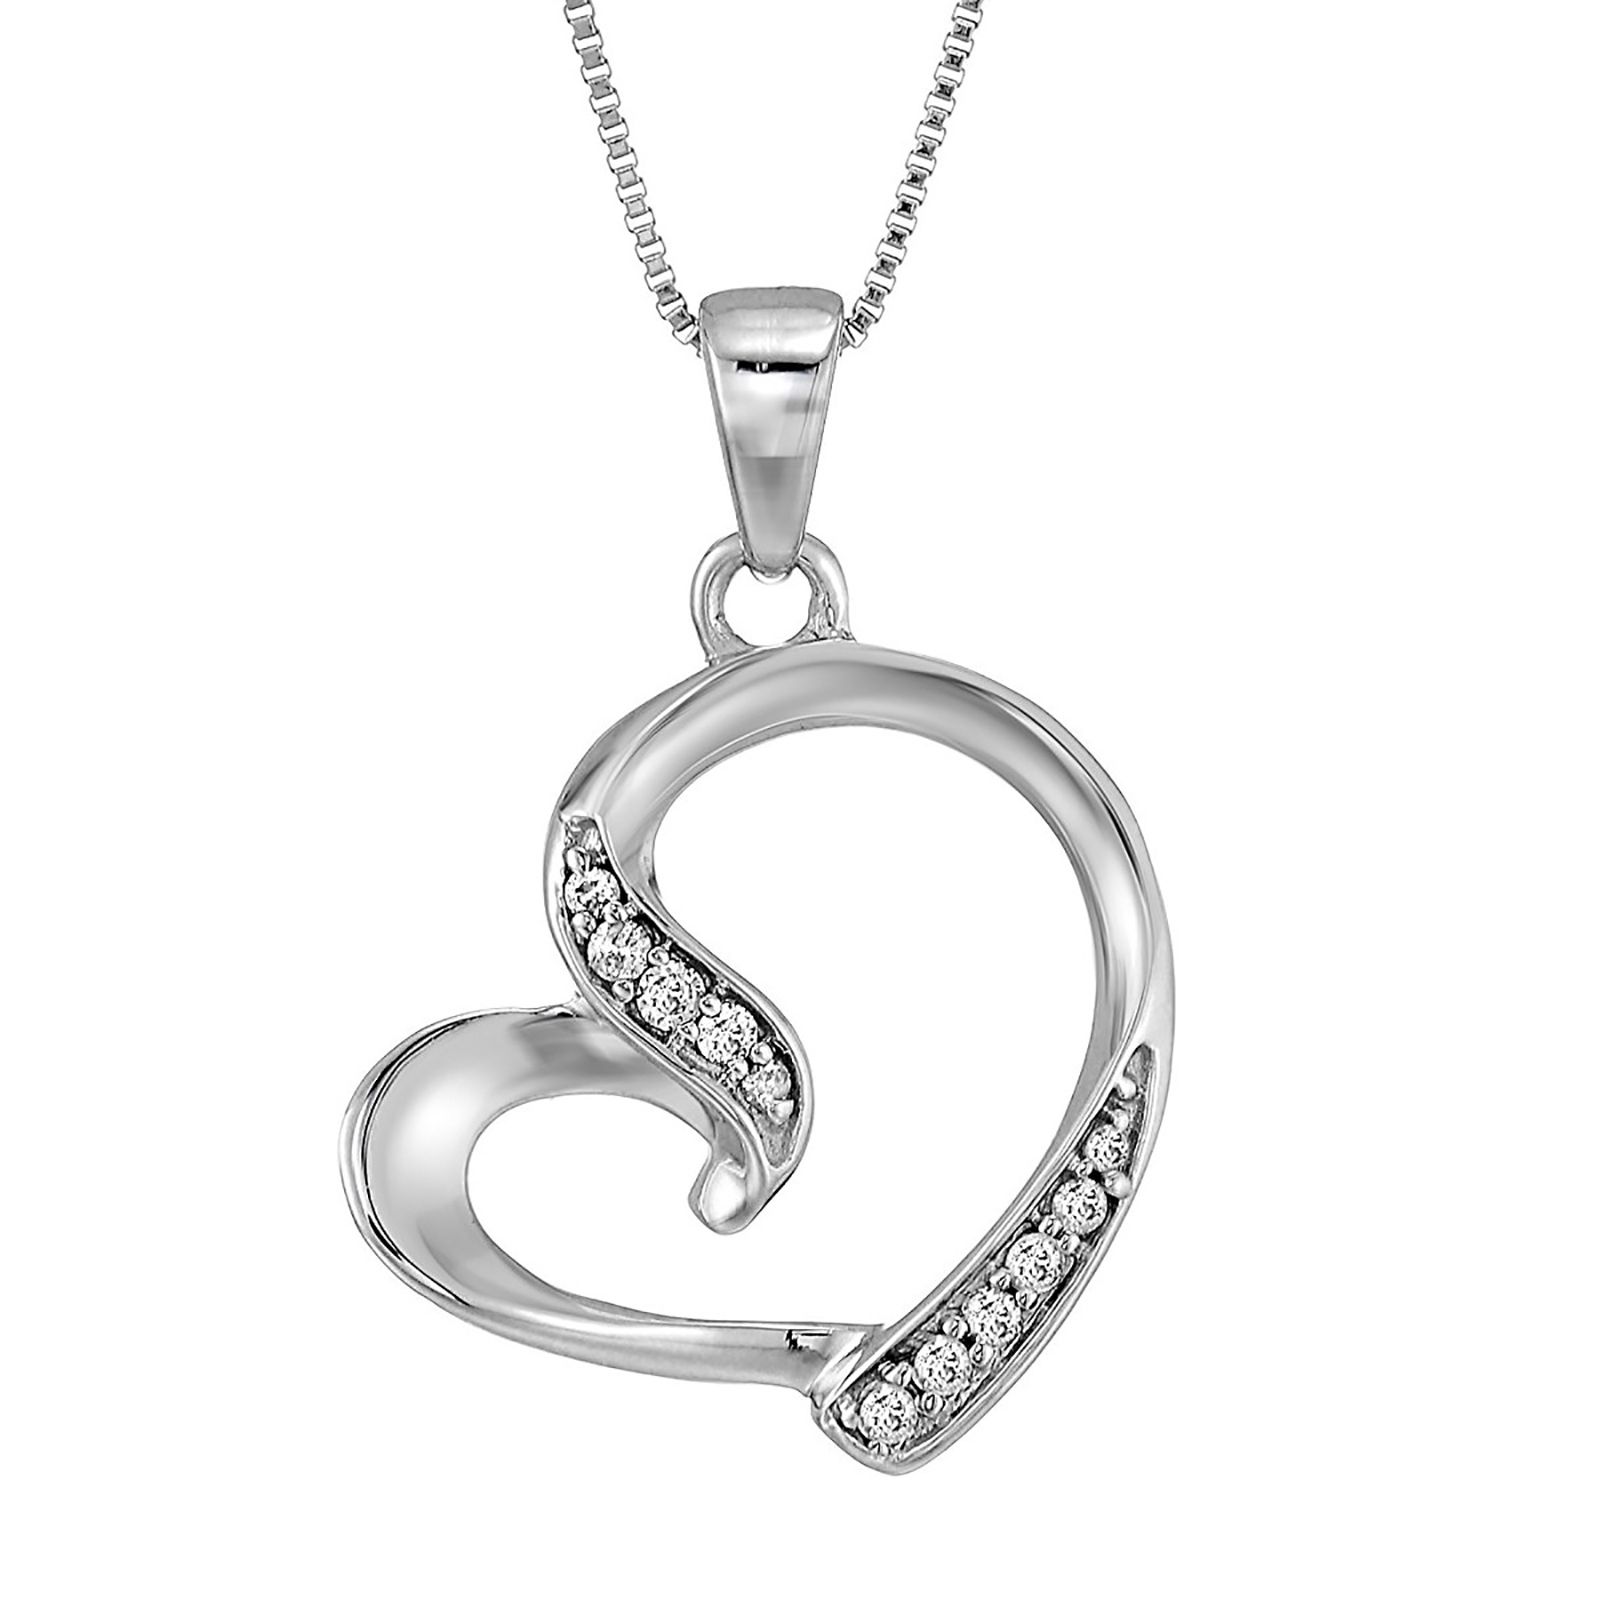 .05 ct. t.w. Diamond Tilted Heart Necklace in 14k White Gold